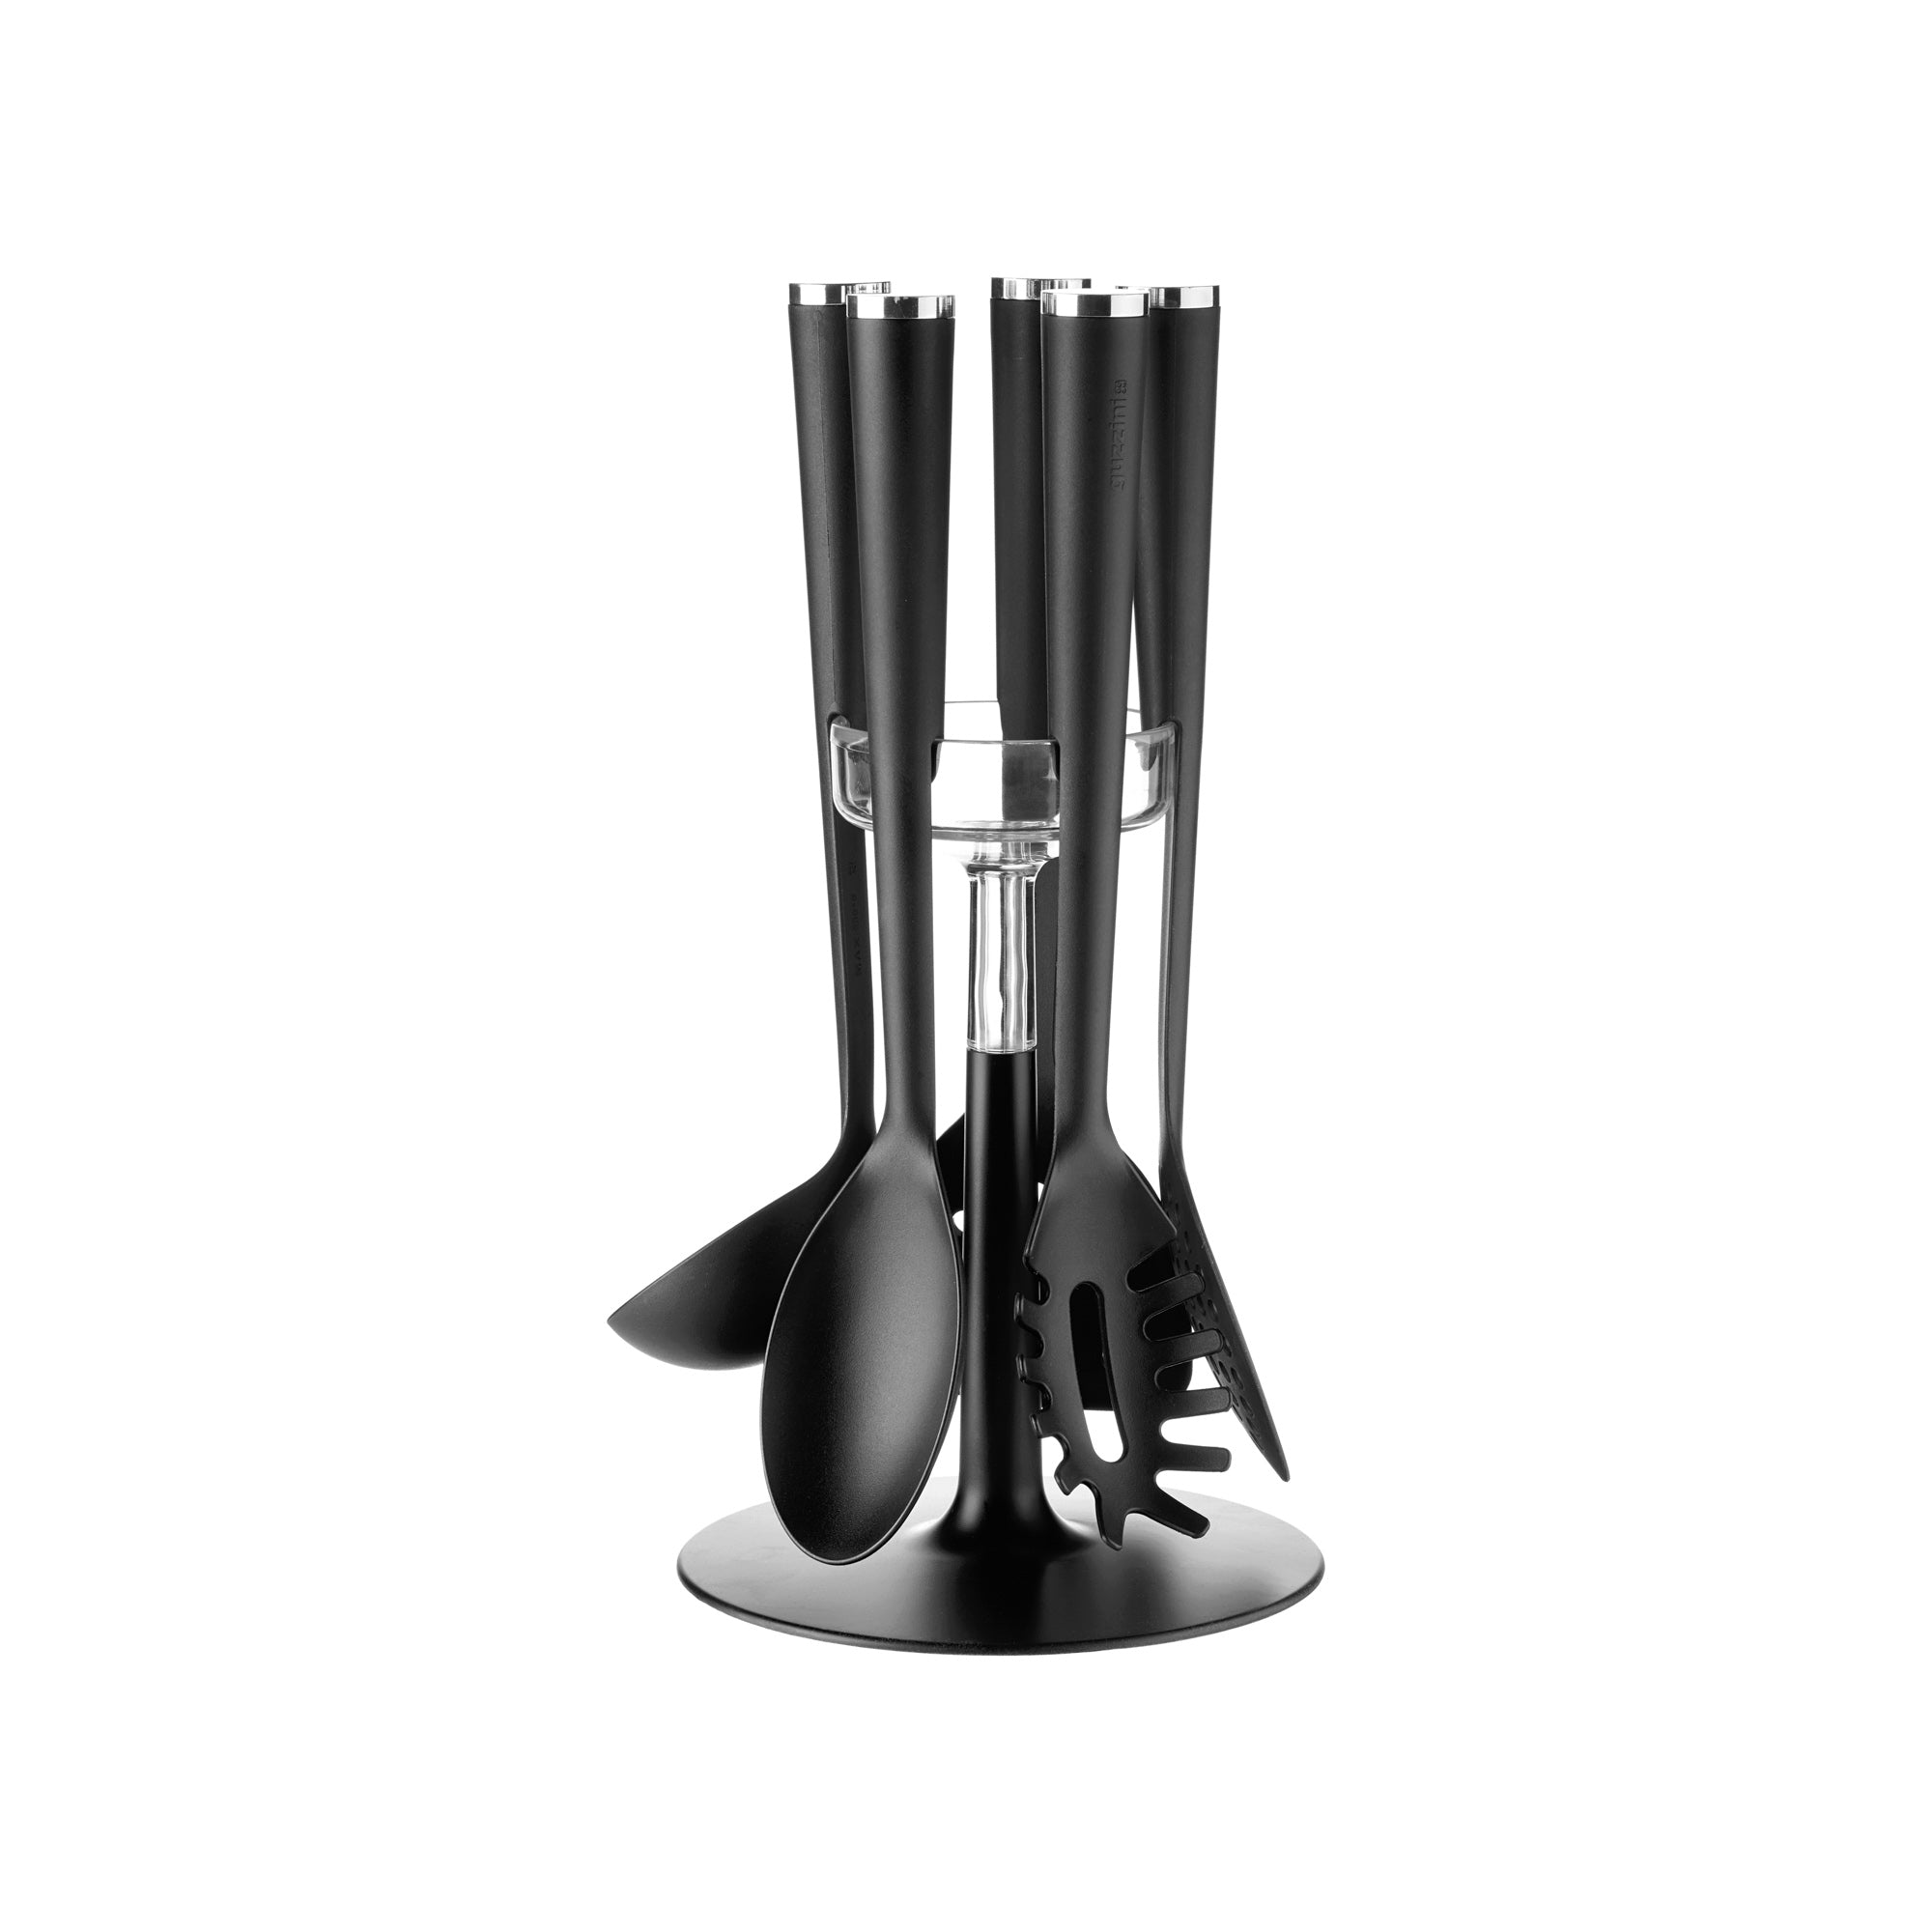 SET 5 KITCHEN TOOLS WITH STAND "PREPARATION"